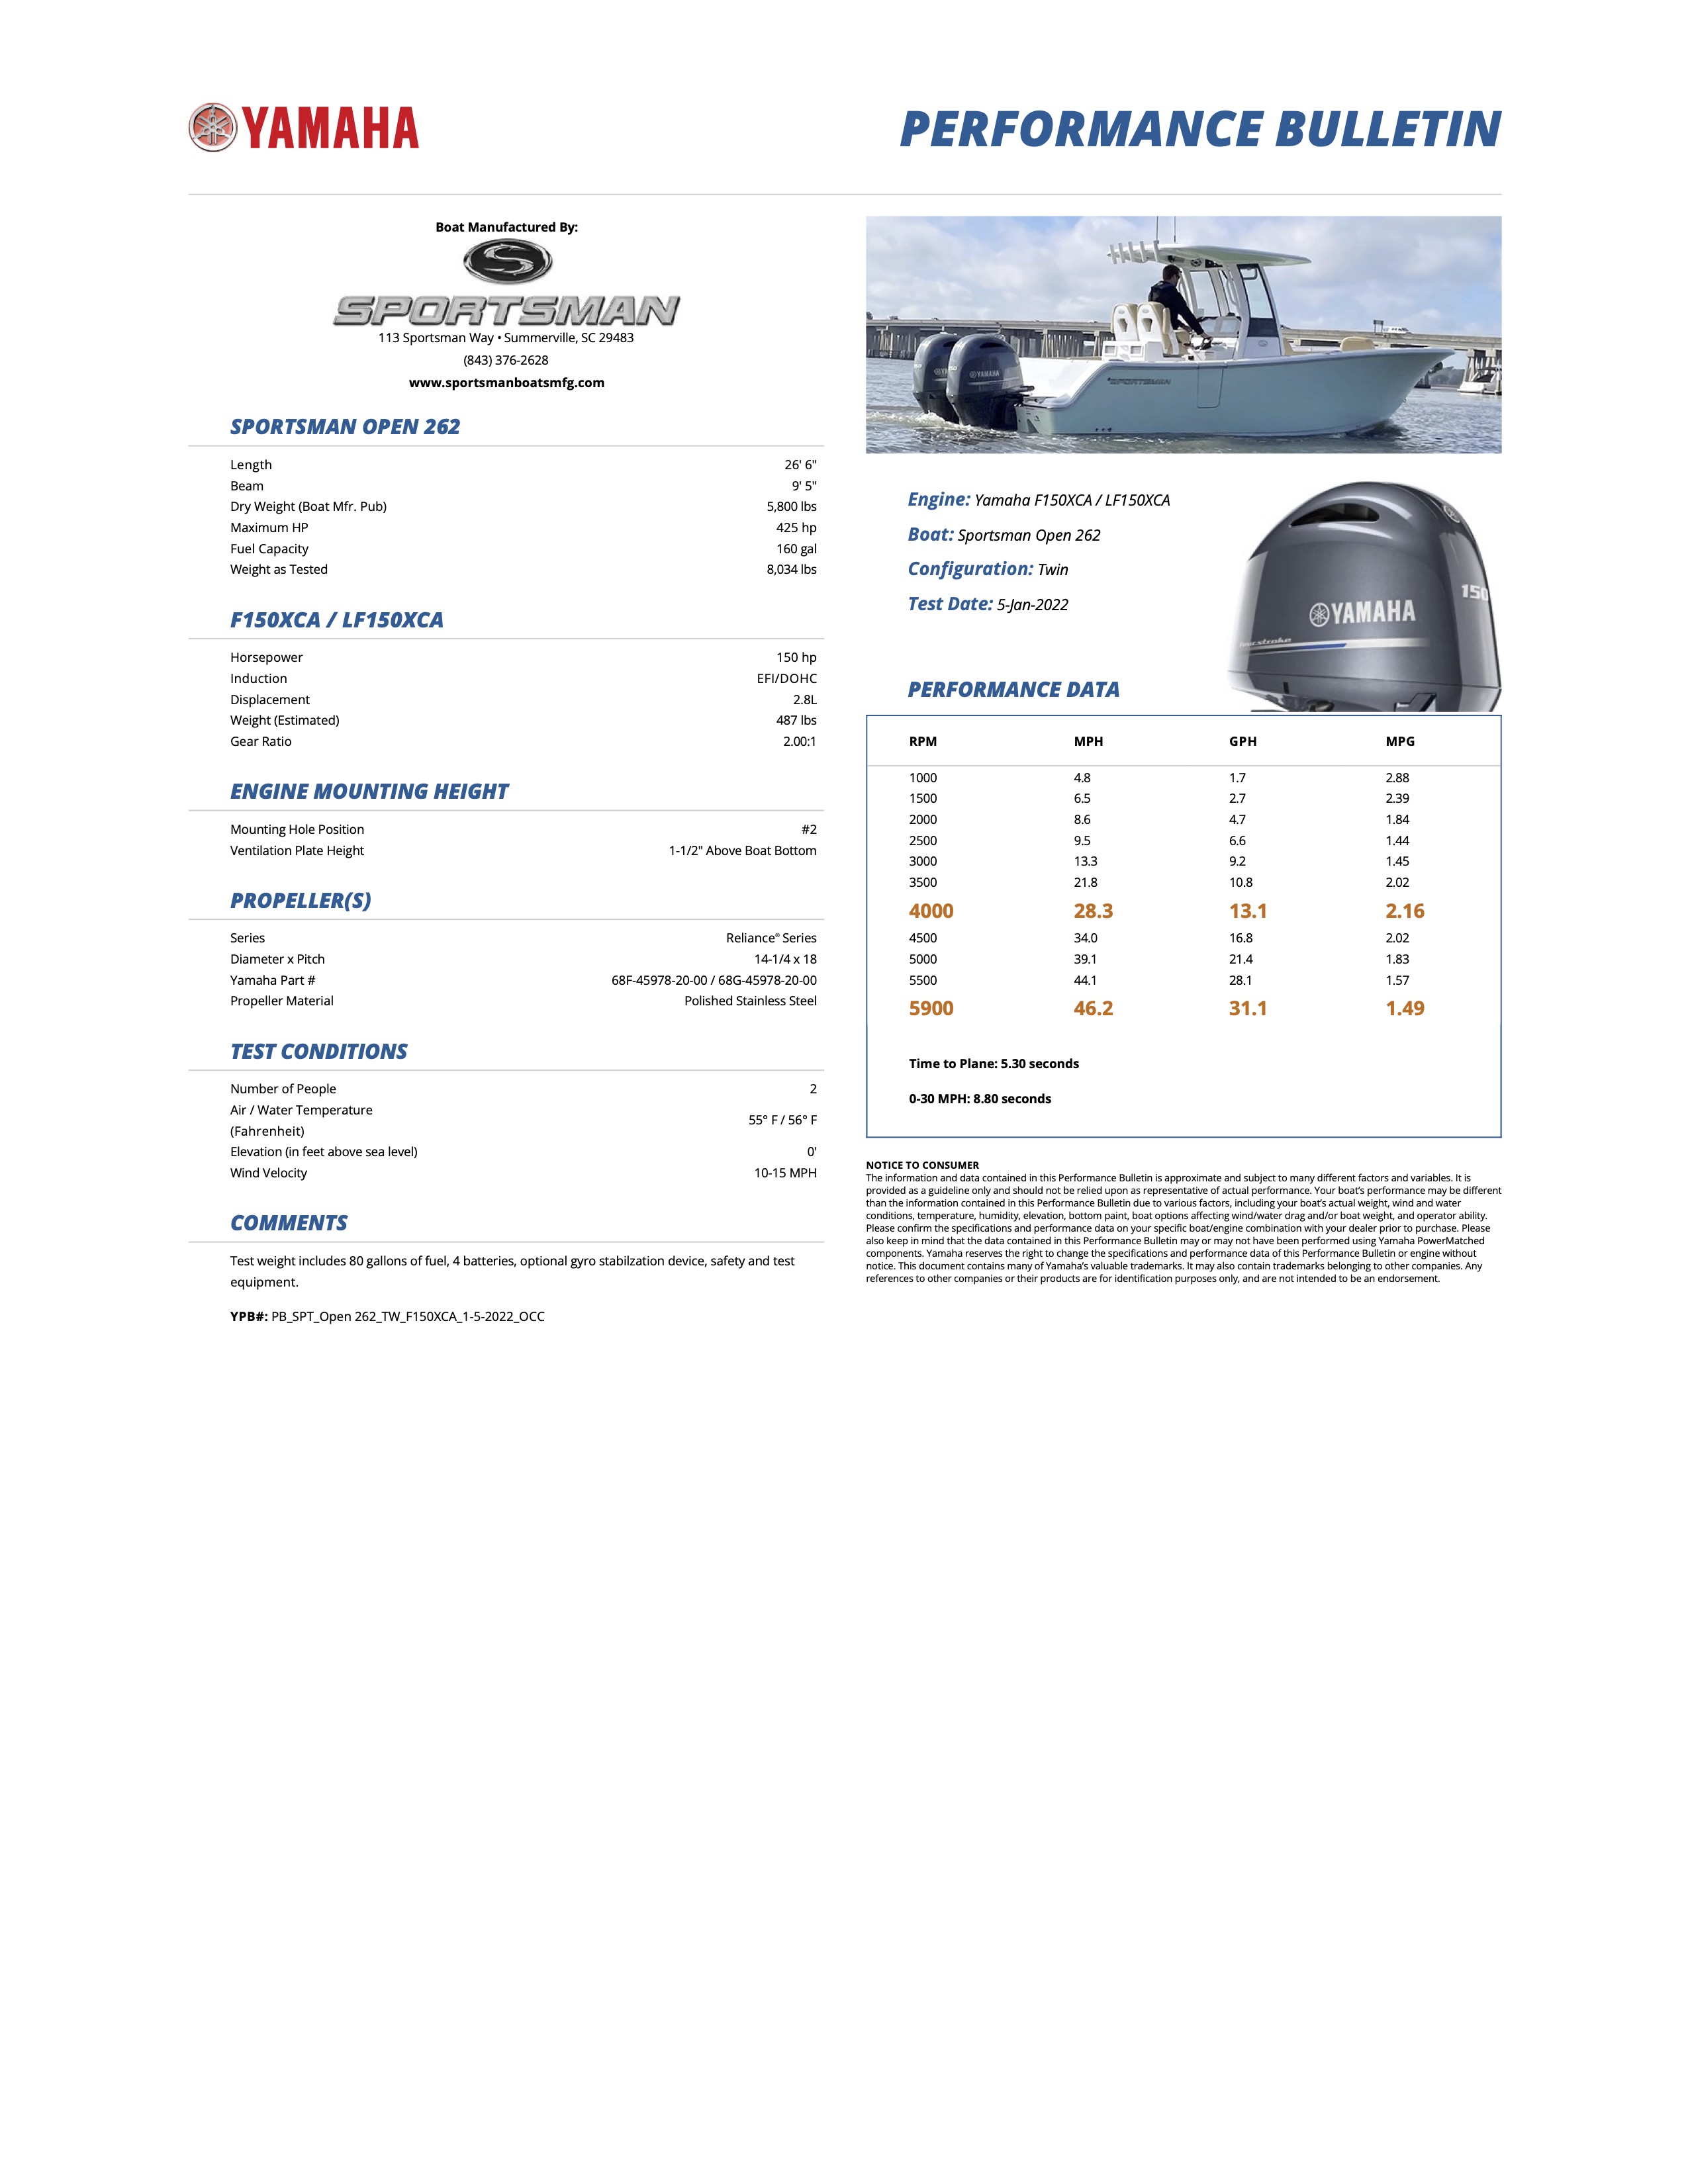 Performance bulletin for 261-center-console